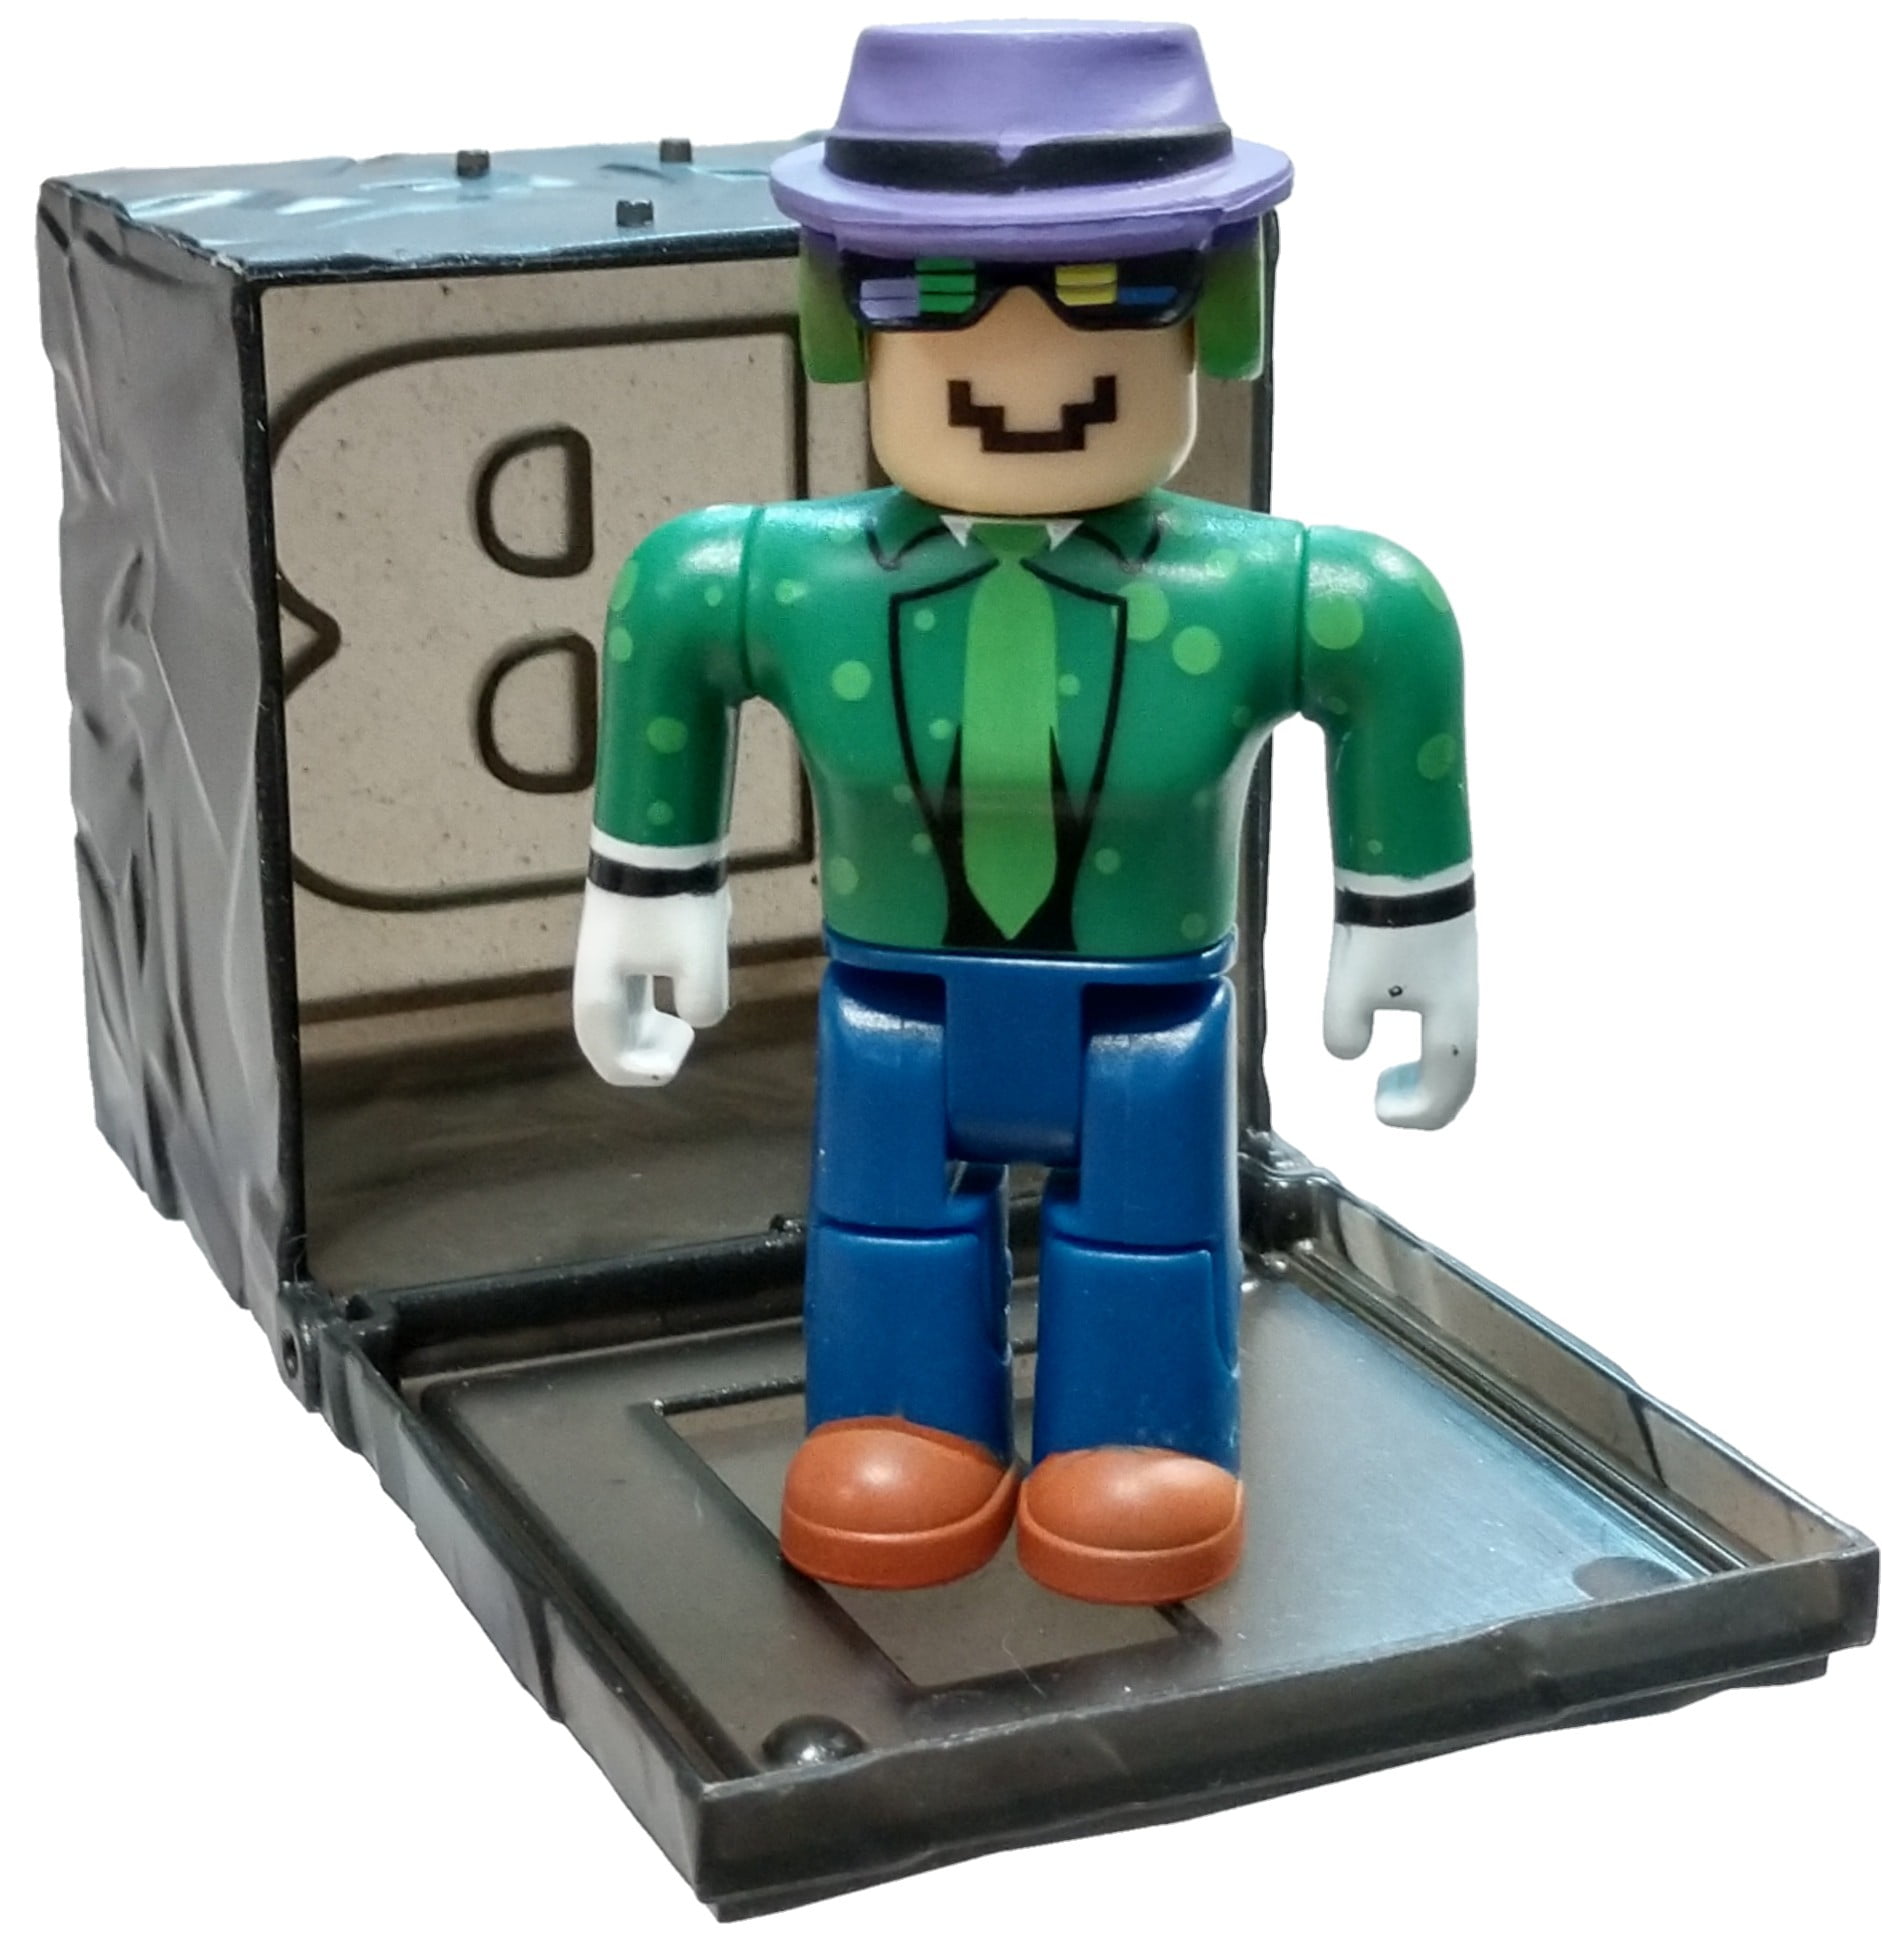 Roblox Series 7 Mrwindy Mini Figure With Black Cube And Online Code No Packaging Walmart Com Walmart Com - roblox series 5 framed agent six mini figure with gold cube and online code no packaging walmart com walmart com